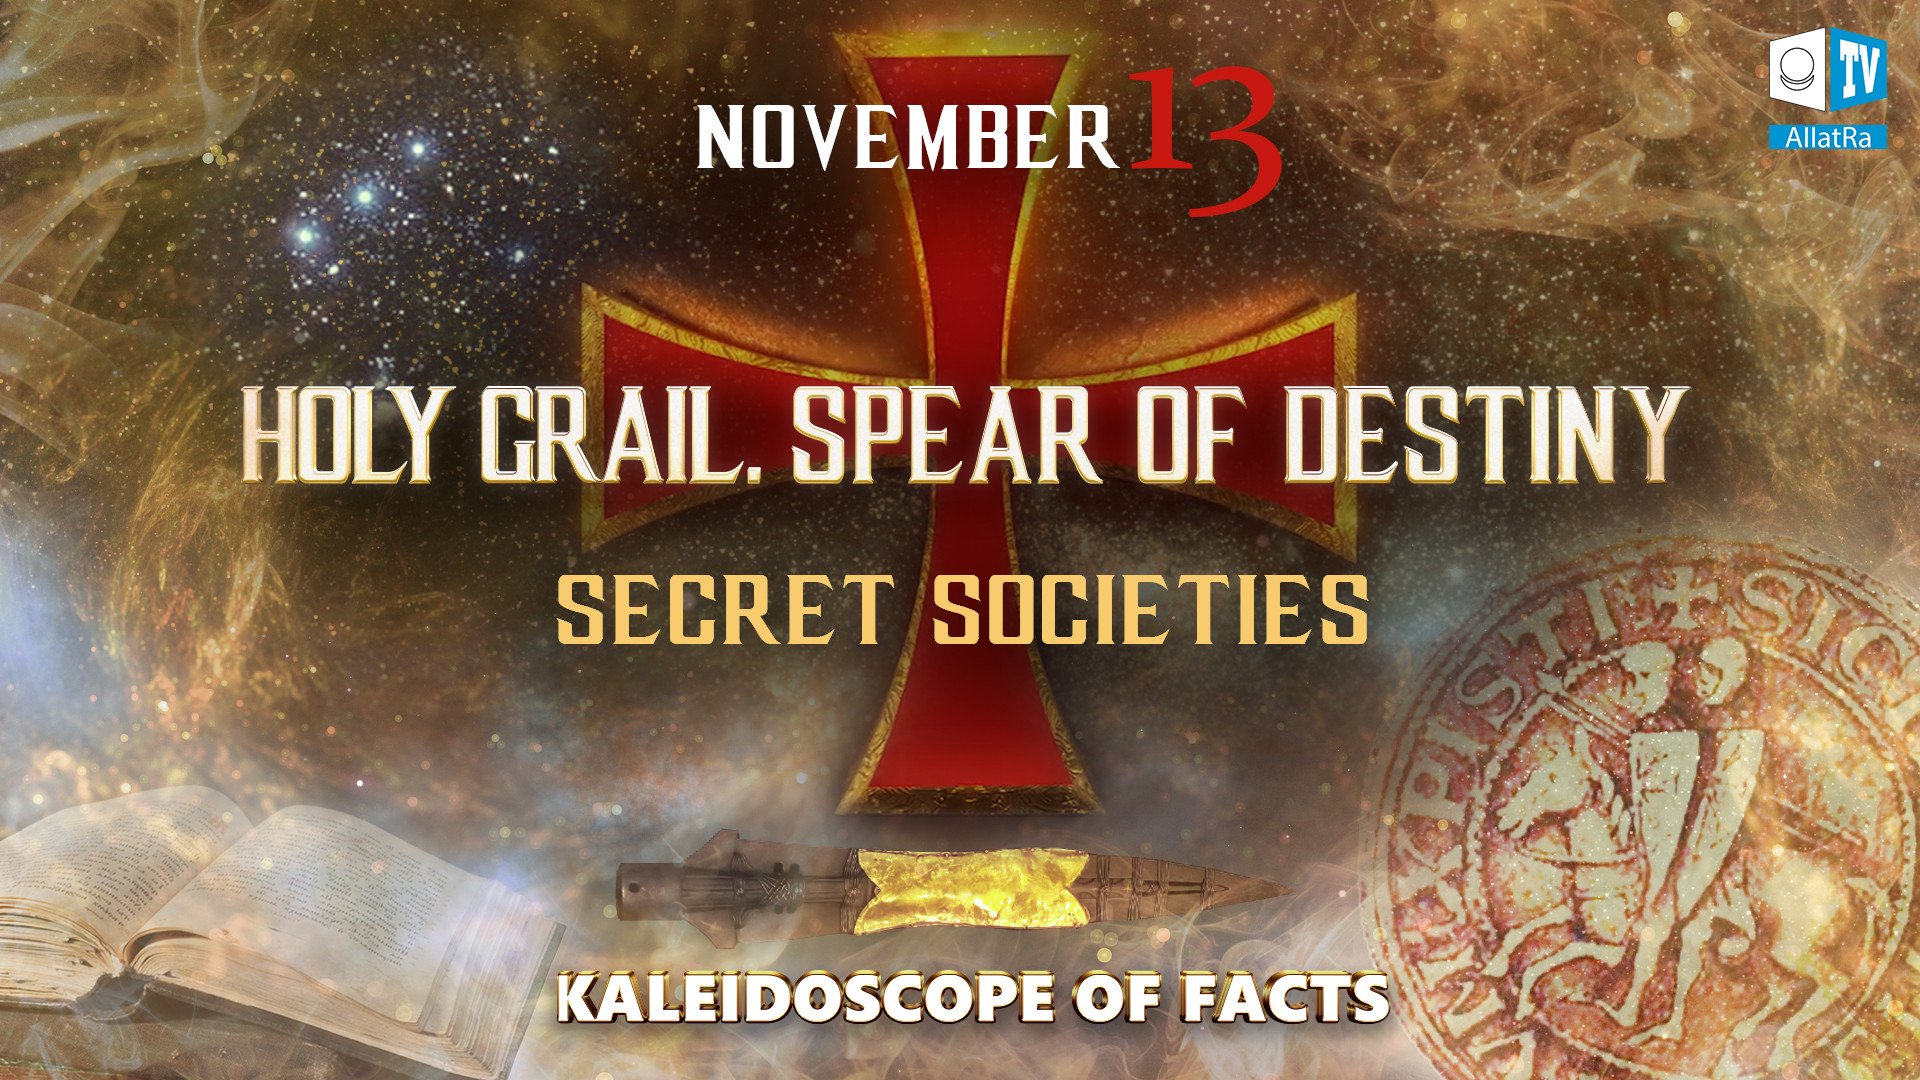 Secret societies and sacred relics. Who guided the course of history? Trailer | Kaleidoscope of Facts